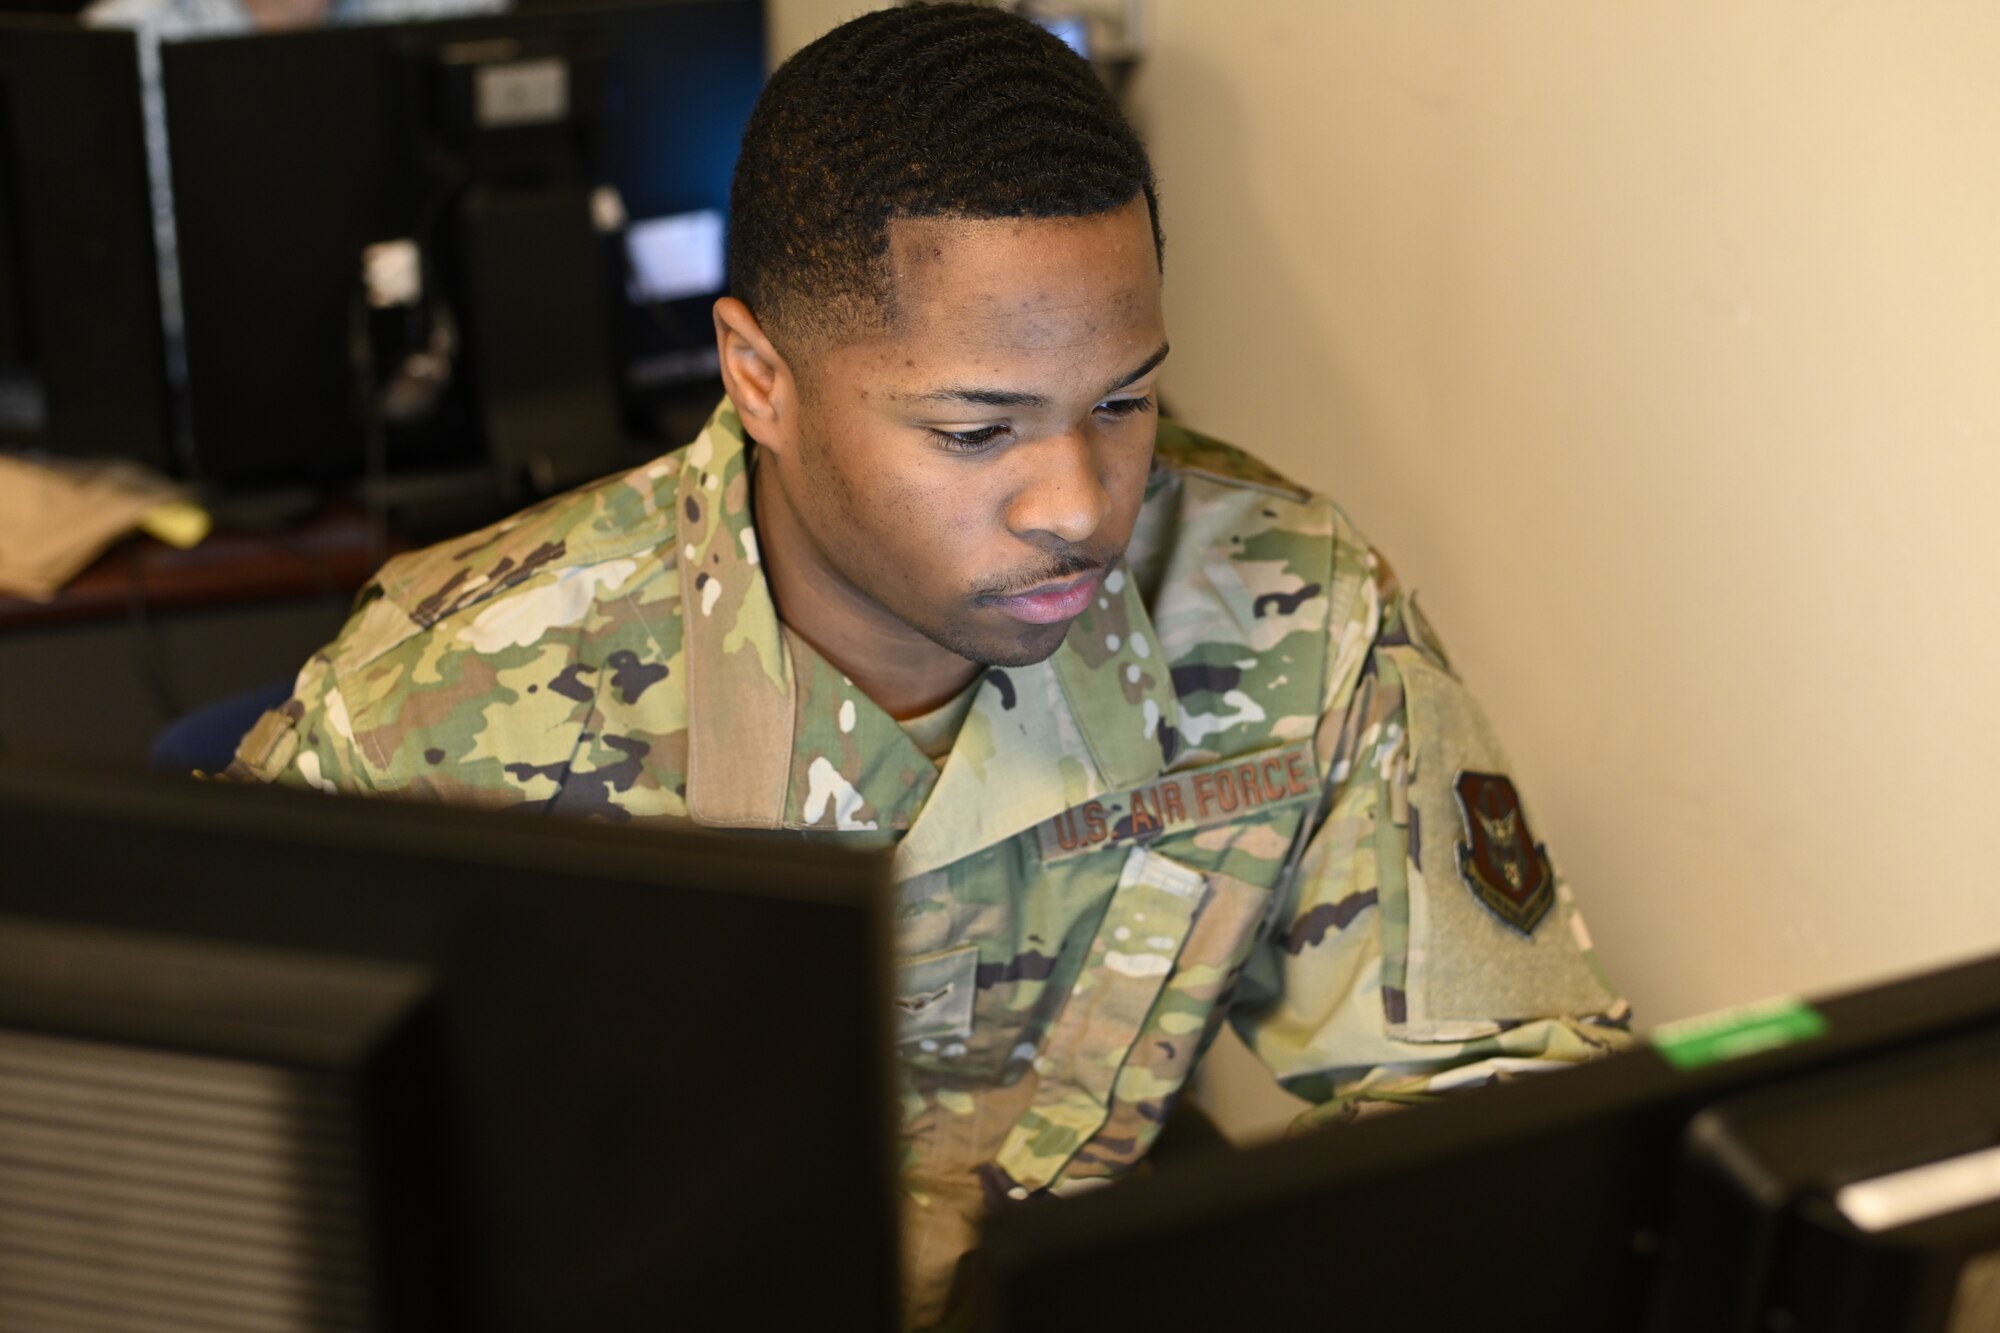 Photo of Airman working at computer.